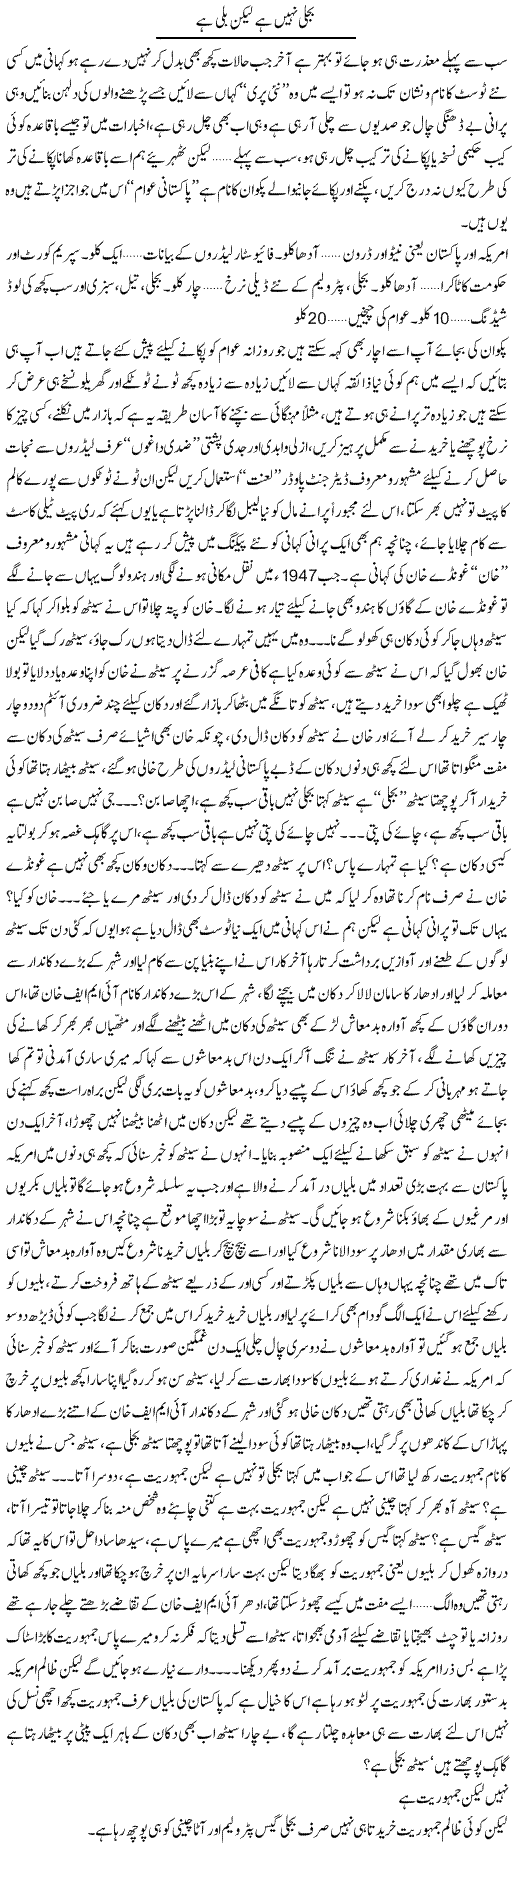 Electricity and Inflation Express Column Saadullah 16 August 2012